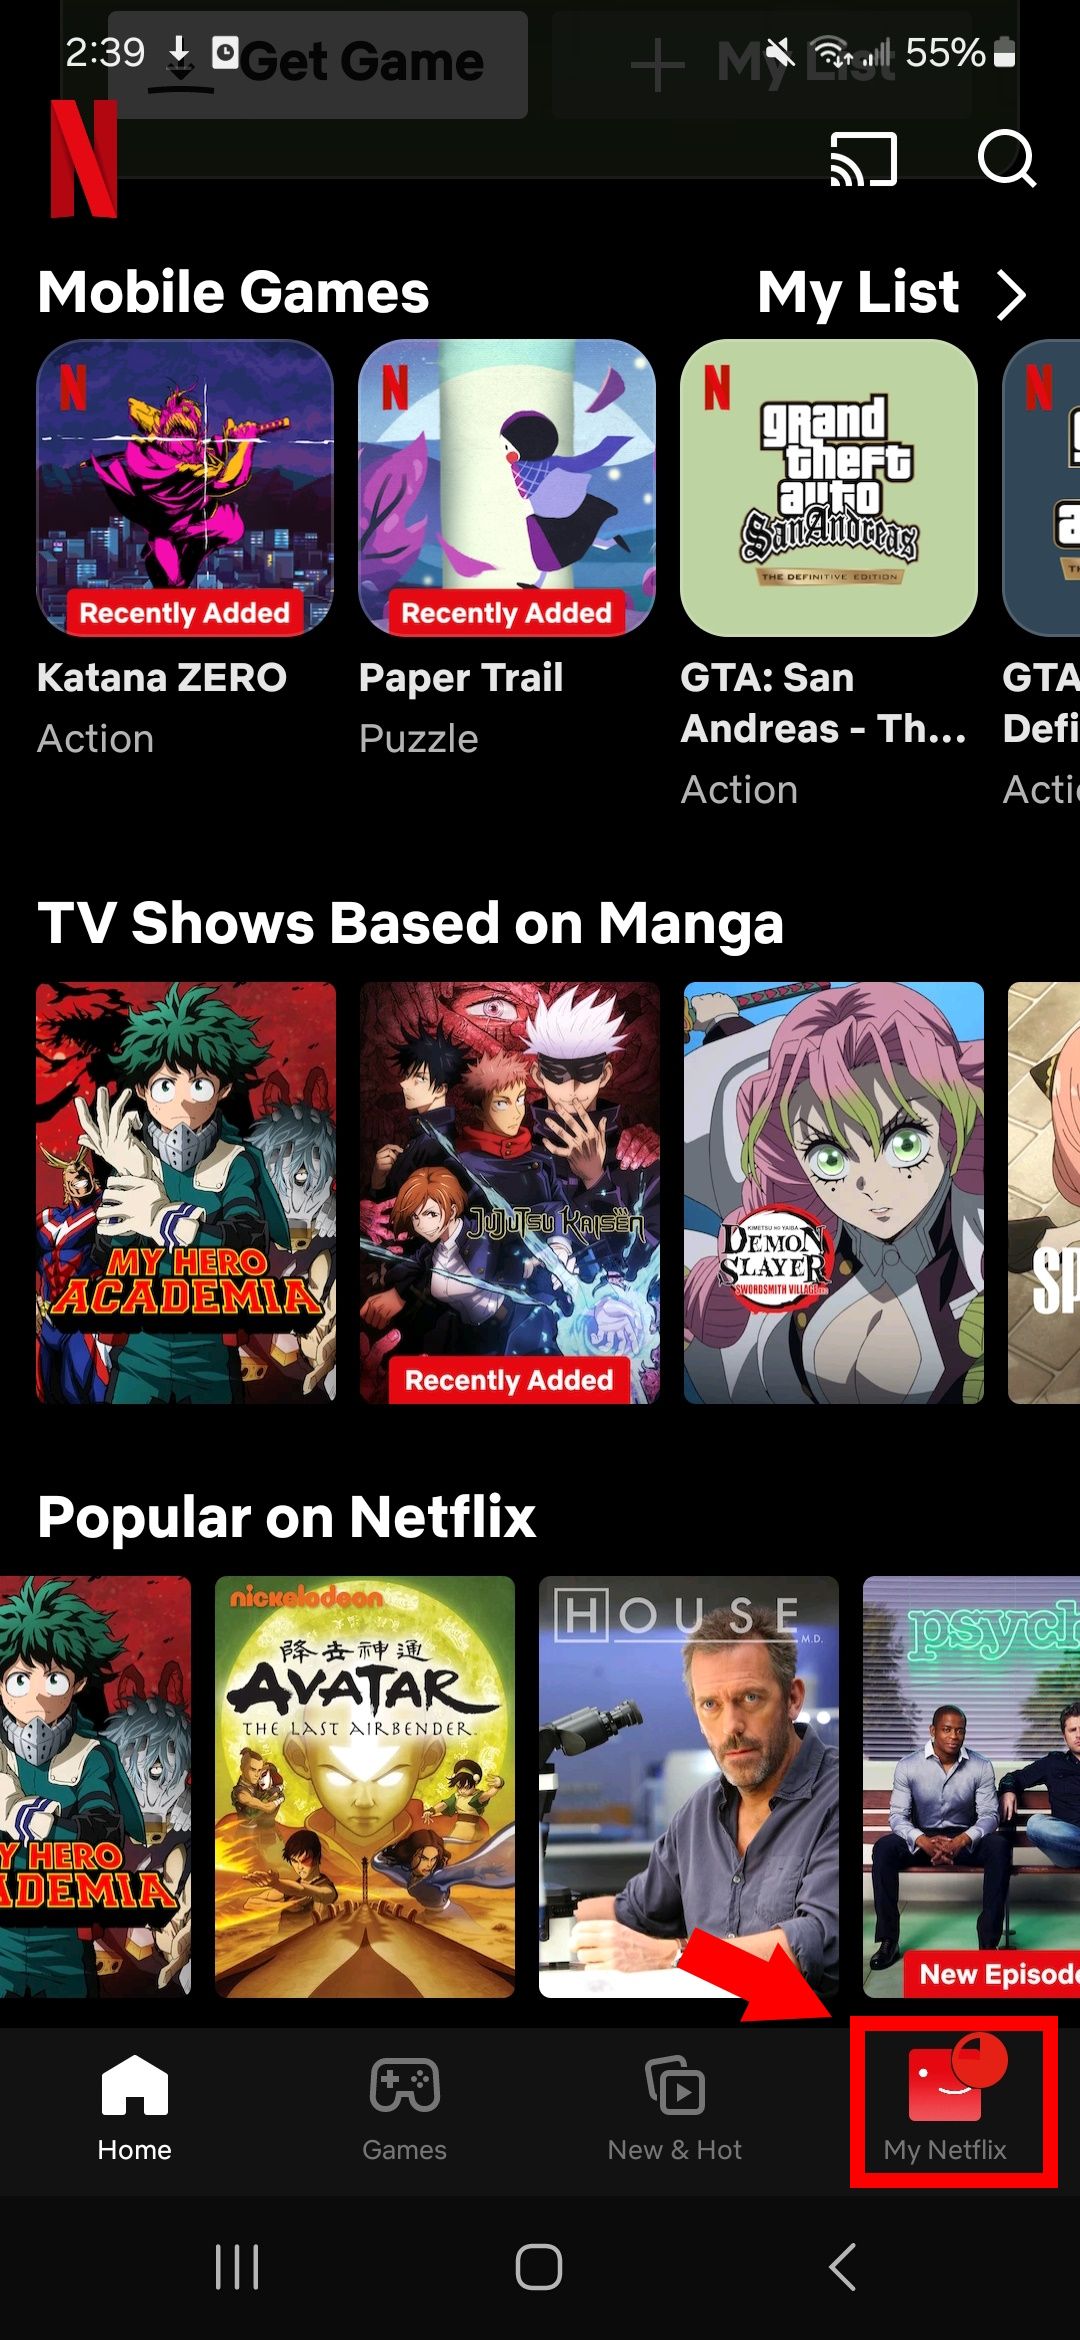 red square outline over my netflix icon in the lower right corner of the netflix app